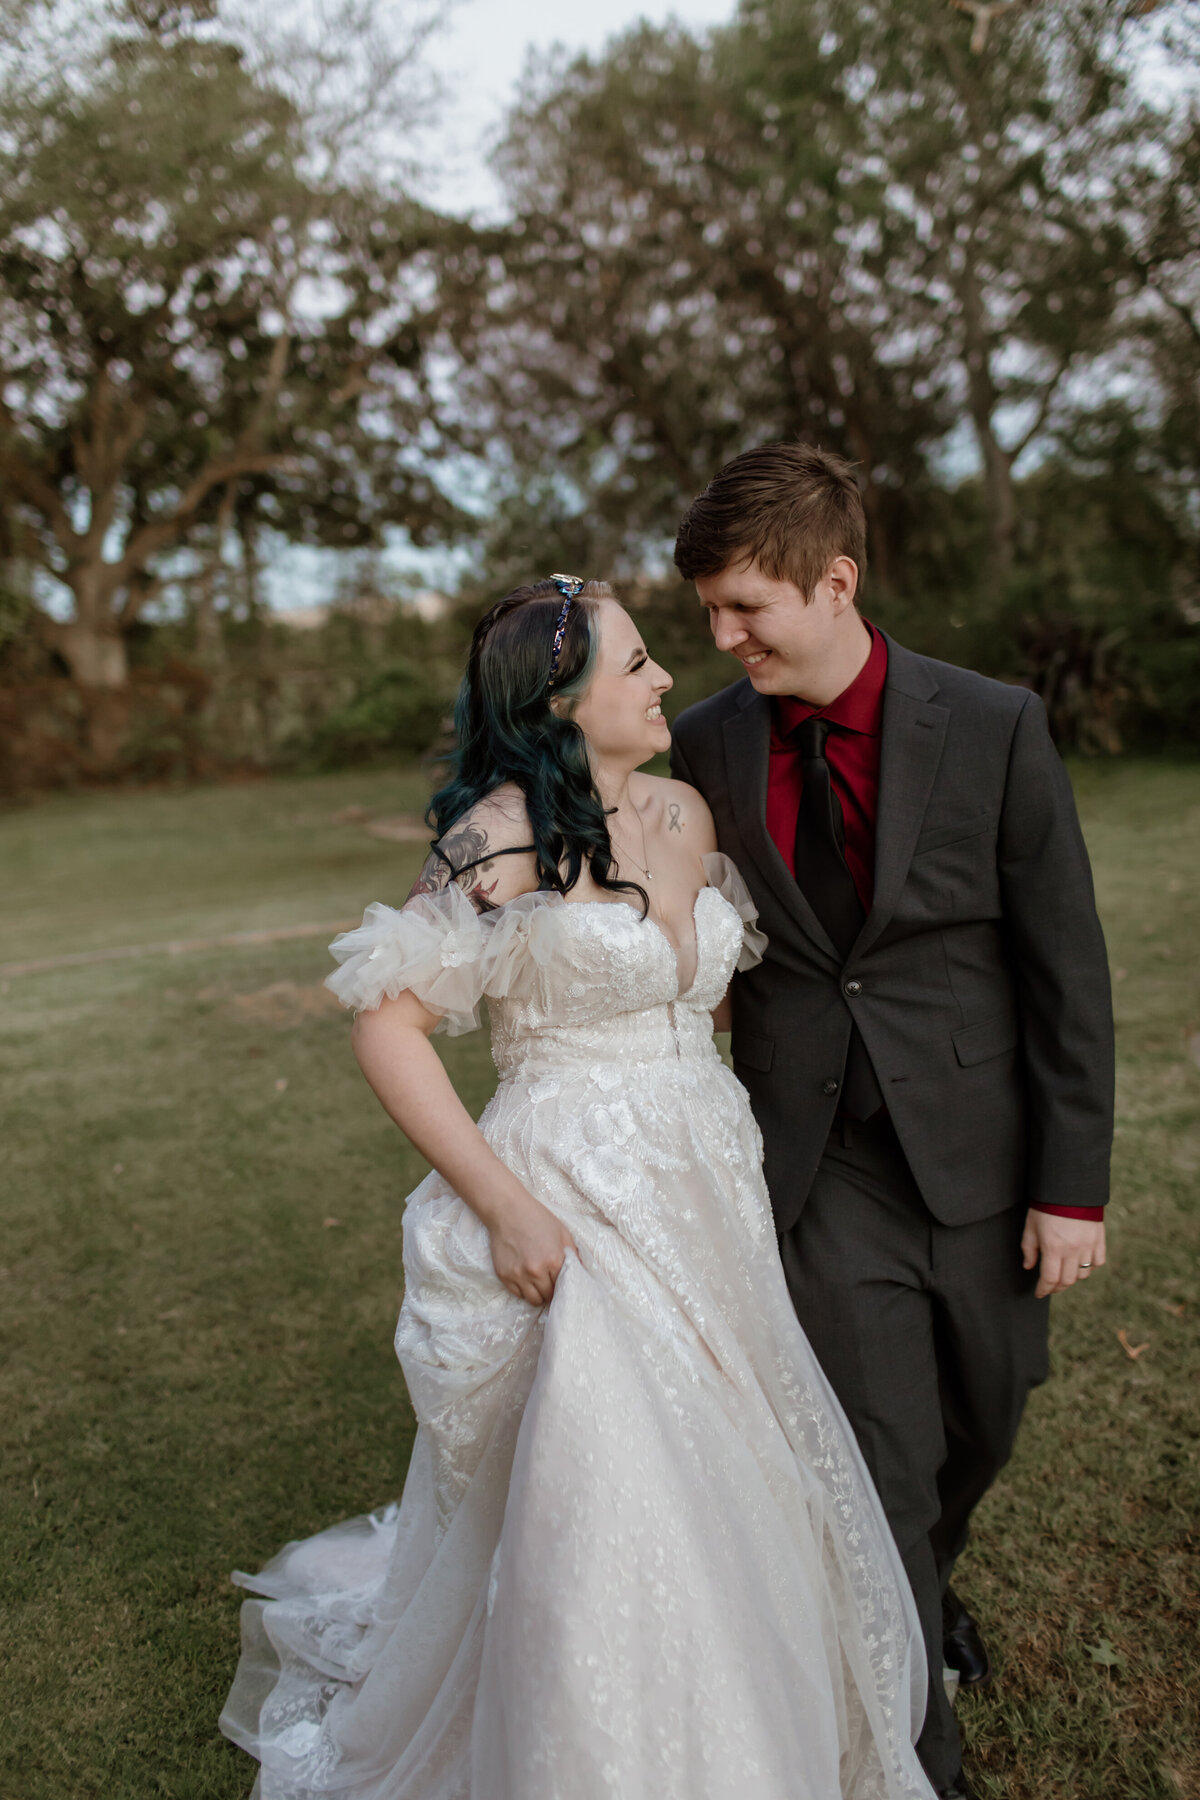 A bride and groom take a romantic sunset walk at Weston Gardens in Bloom in Fort Worth Texas. Captured by Fort Worth Wedding Photographer, Megan Christine Studio